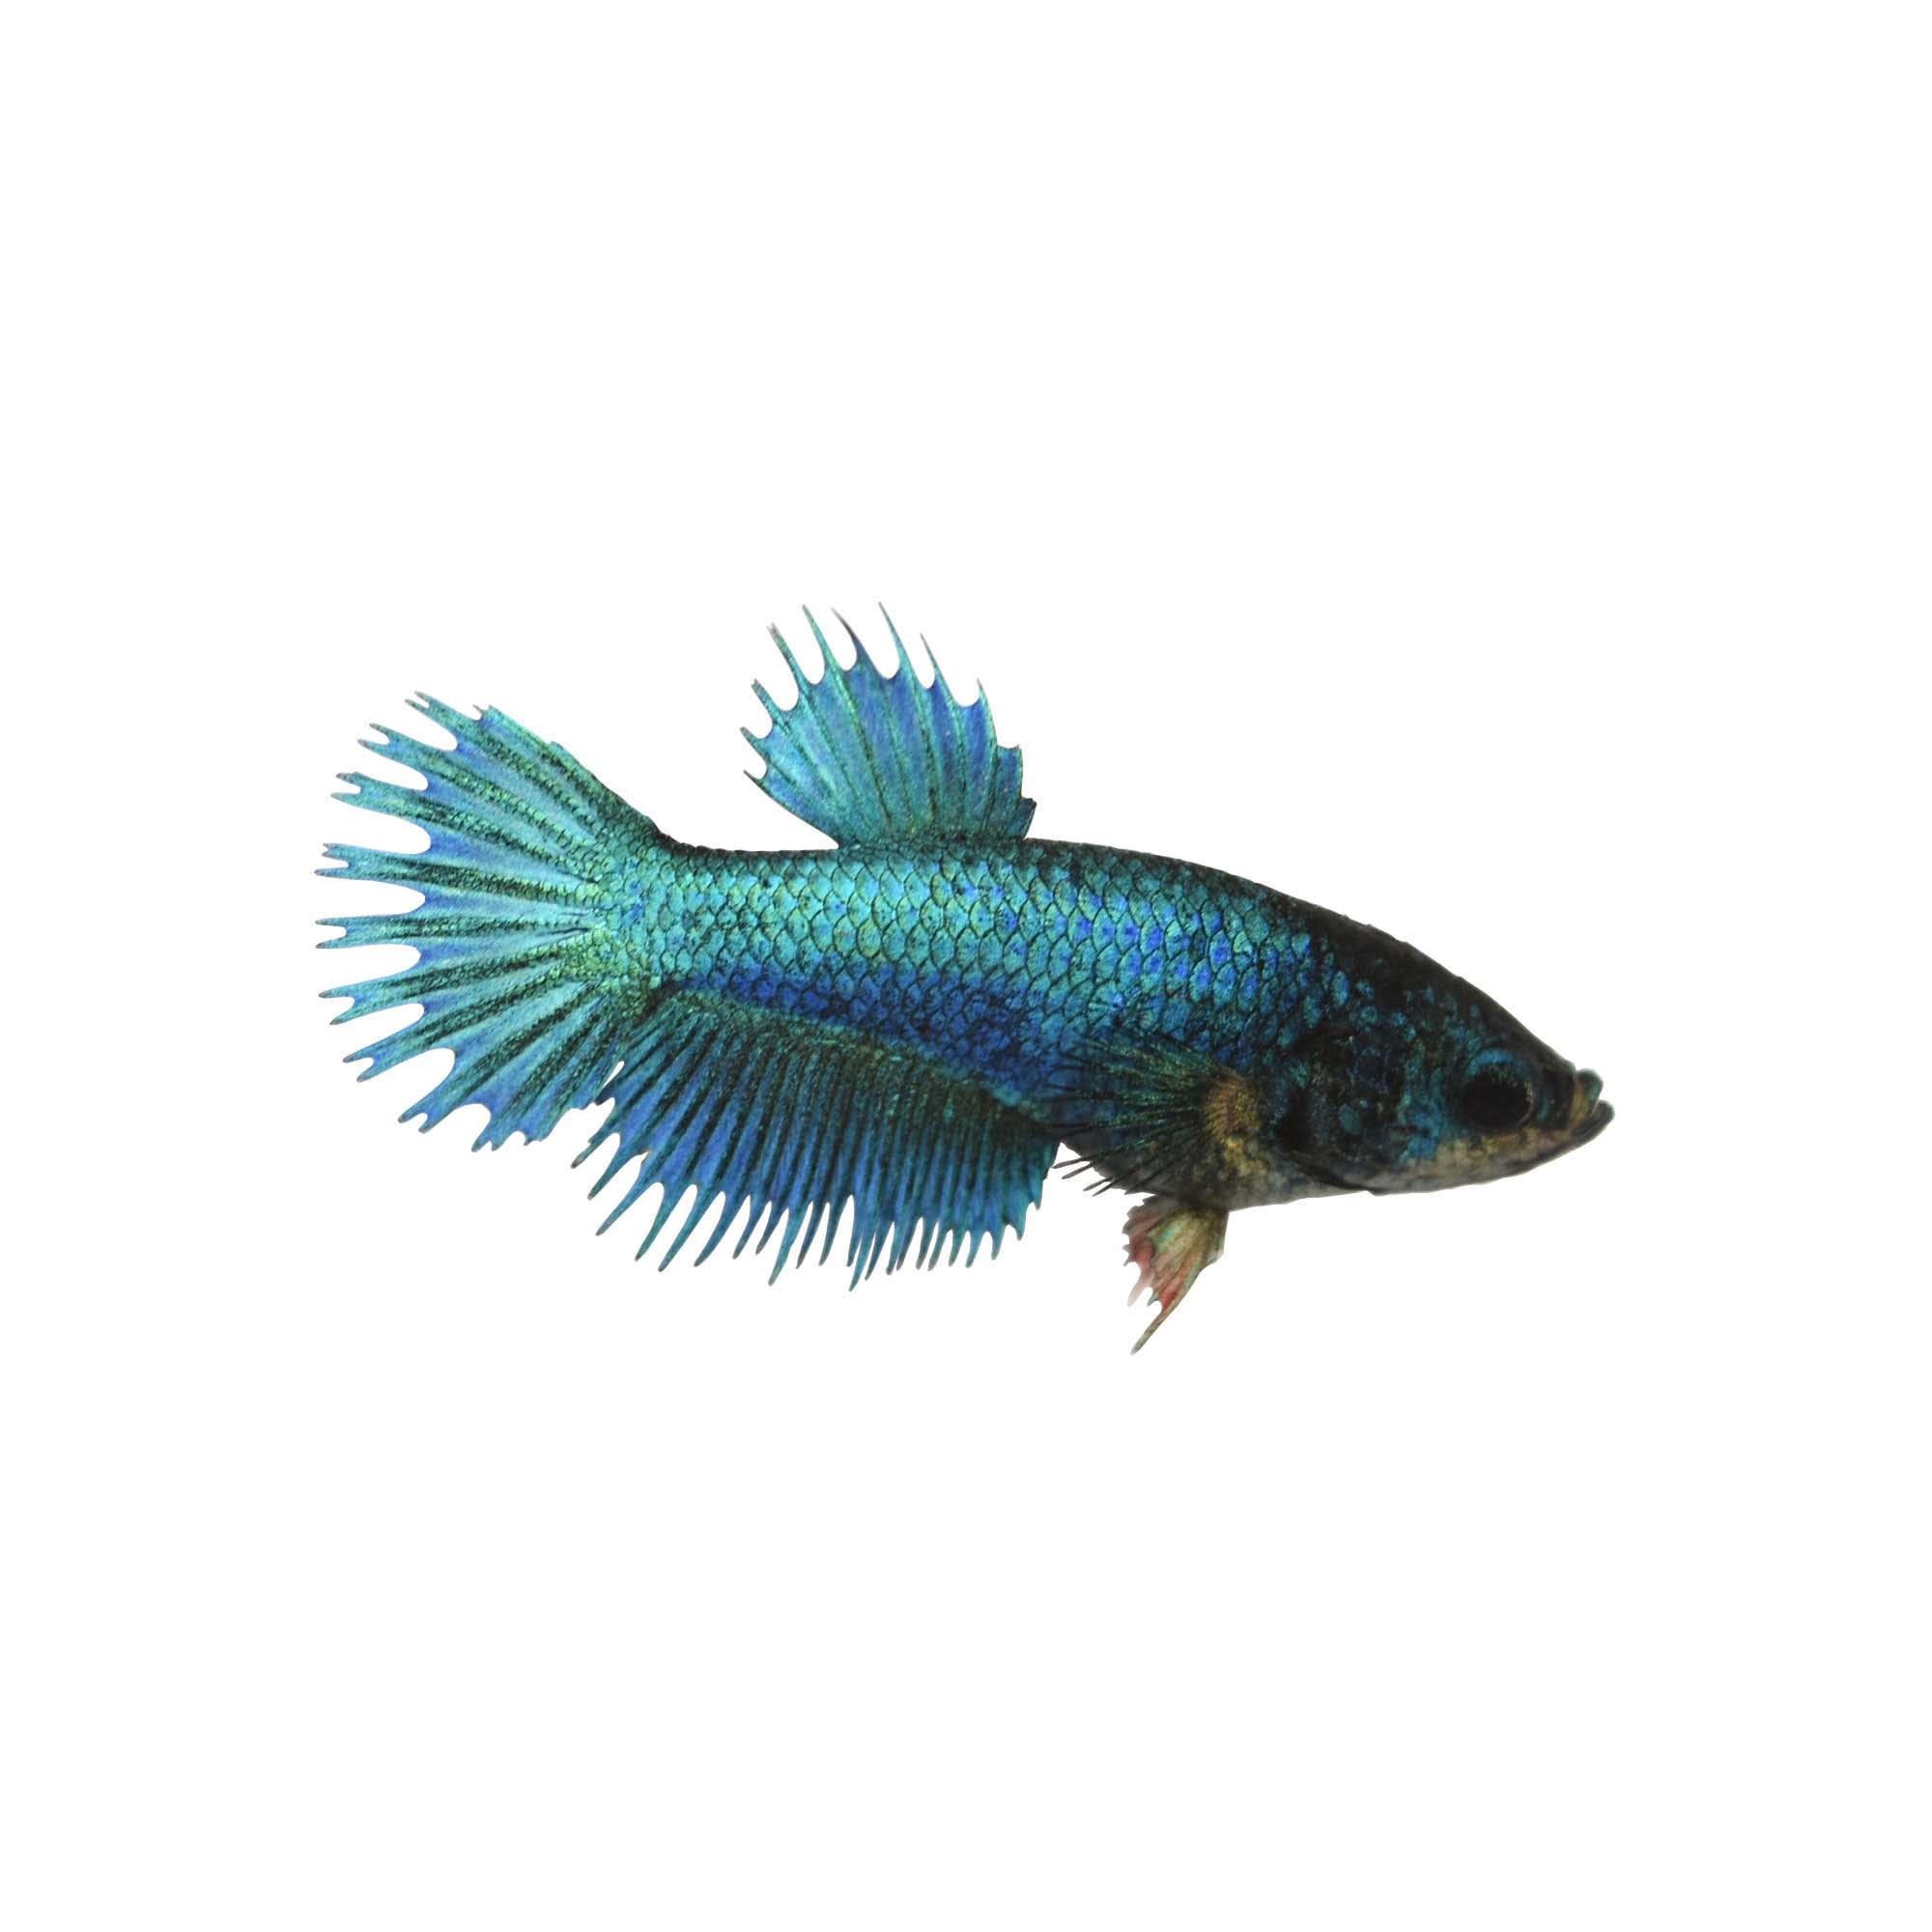 Blue Female Crowntail Betta Fish For Sale Order Online Petco